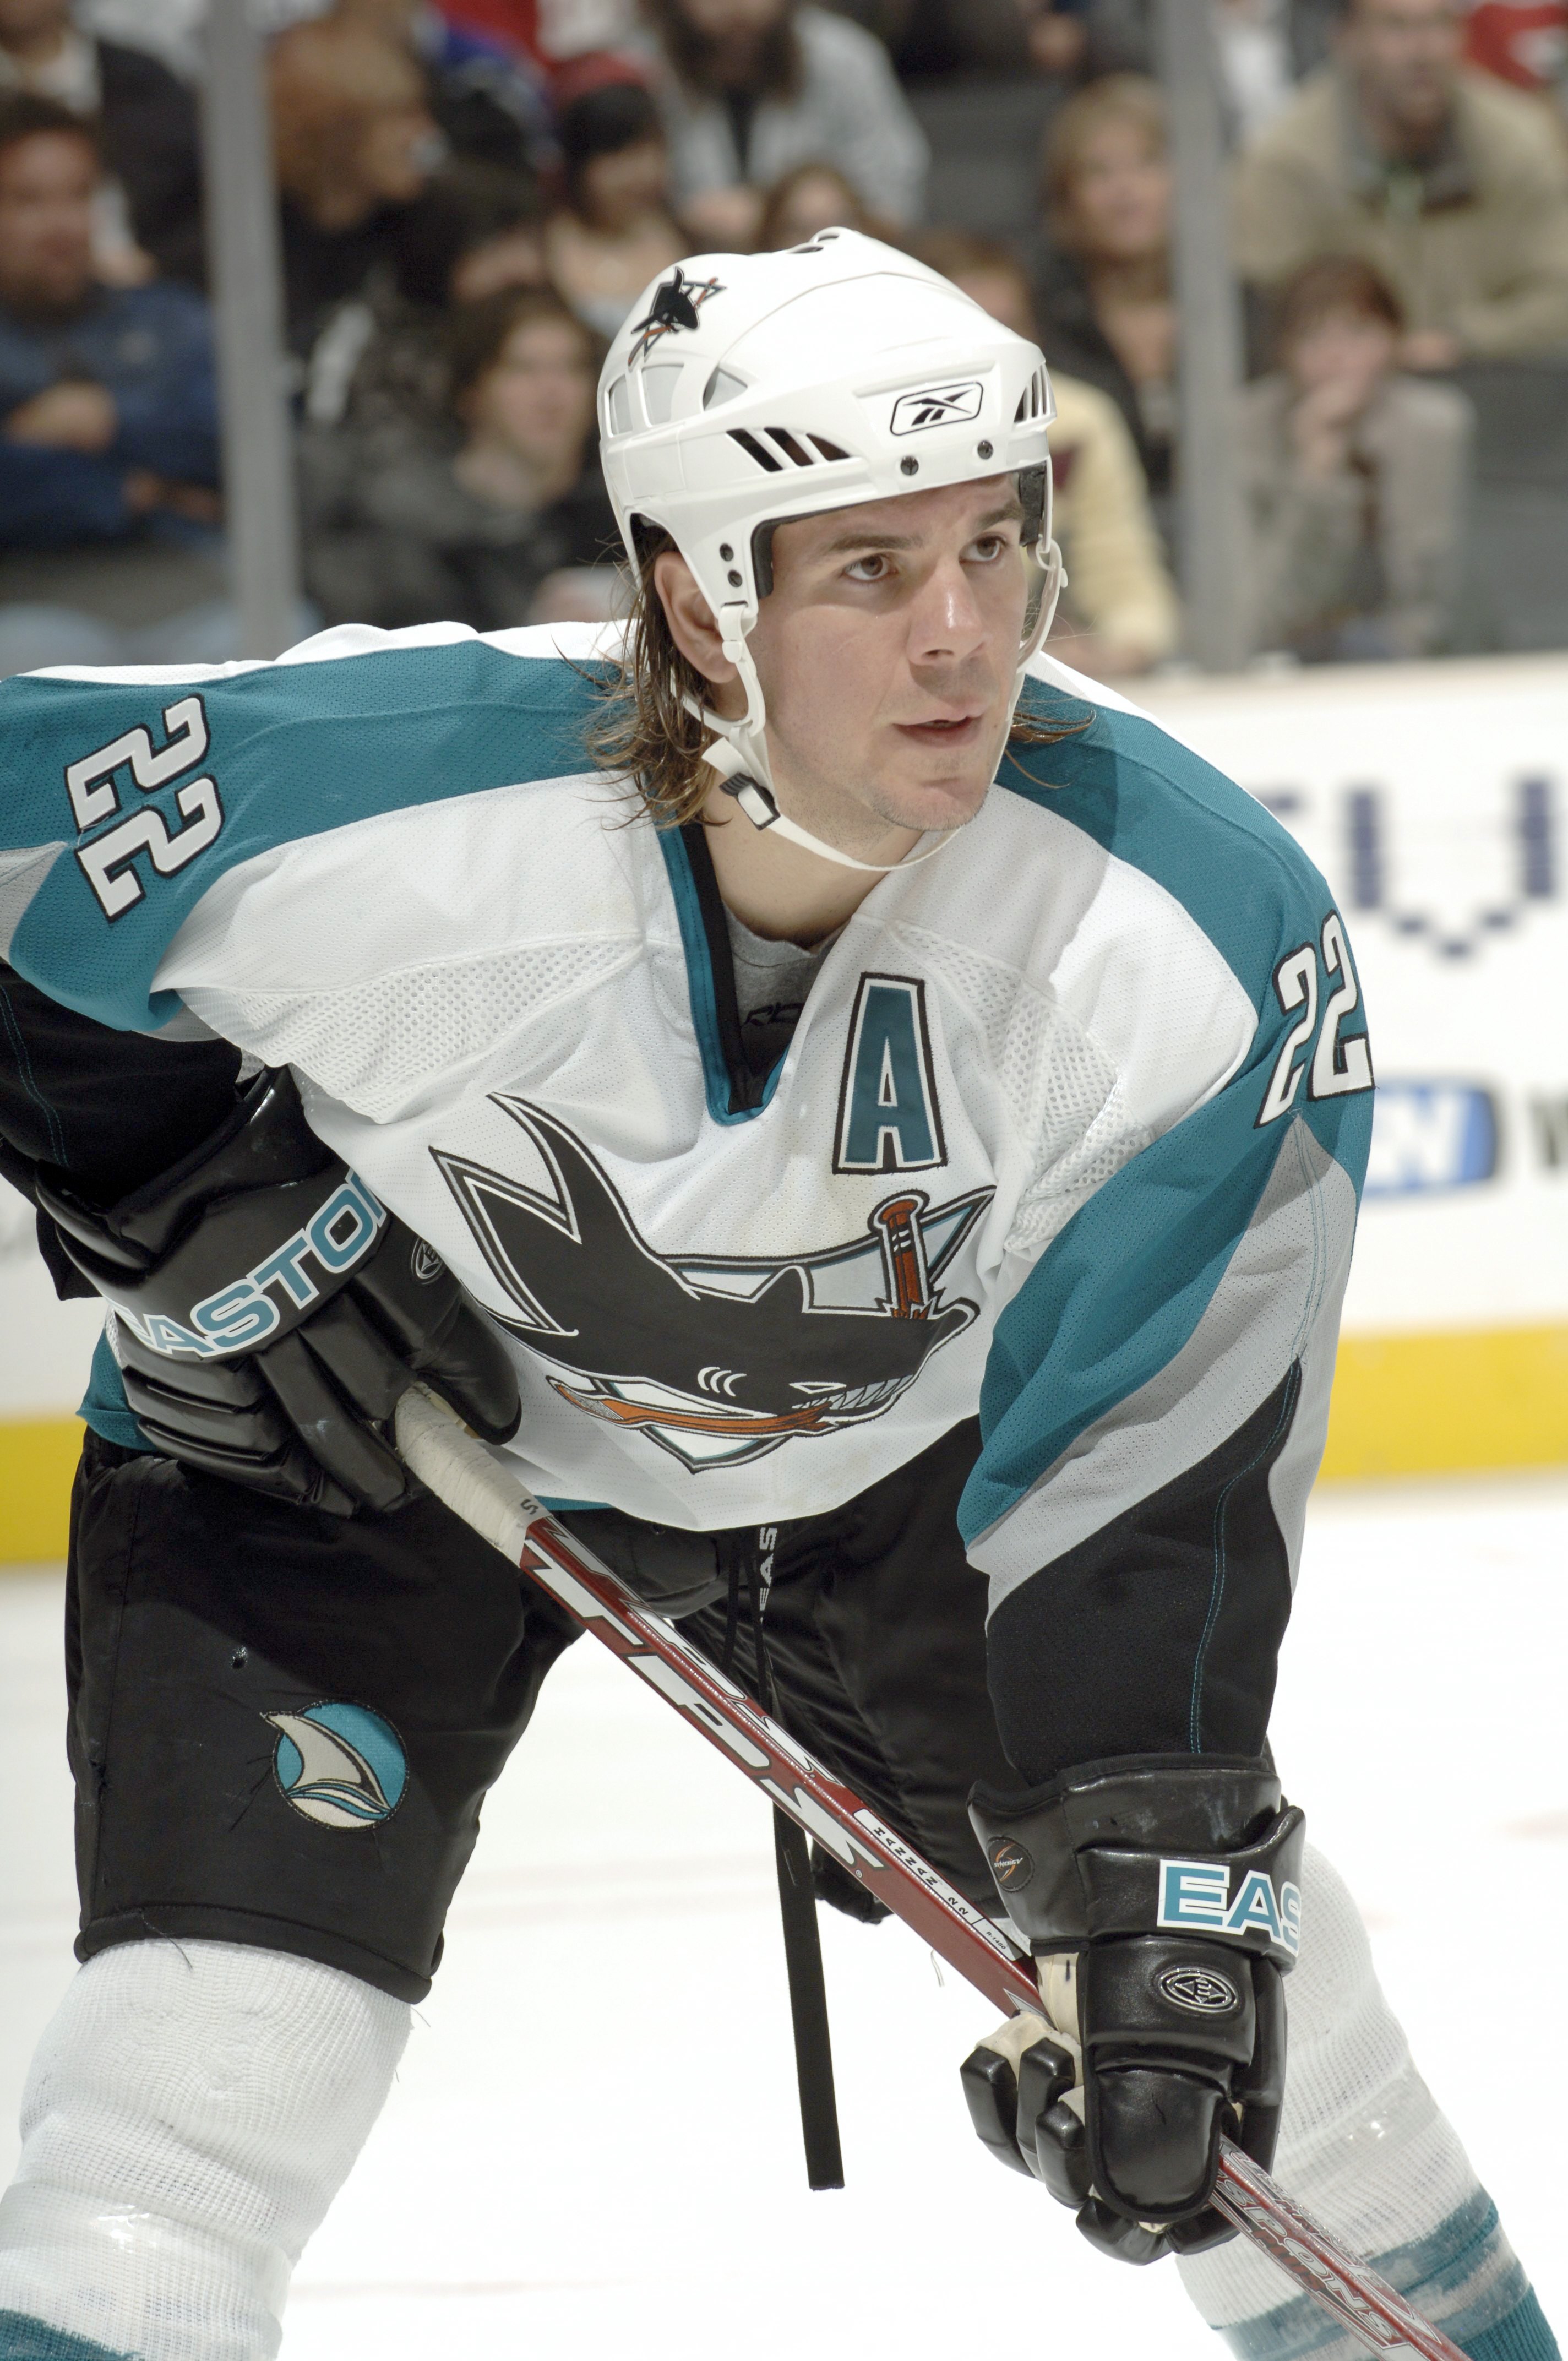 Which player who have played for the San Jose Sharks and 500+